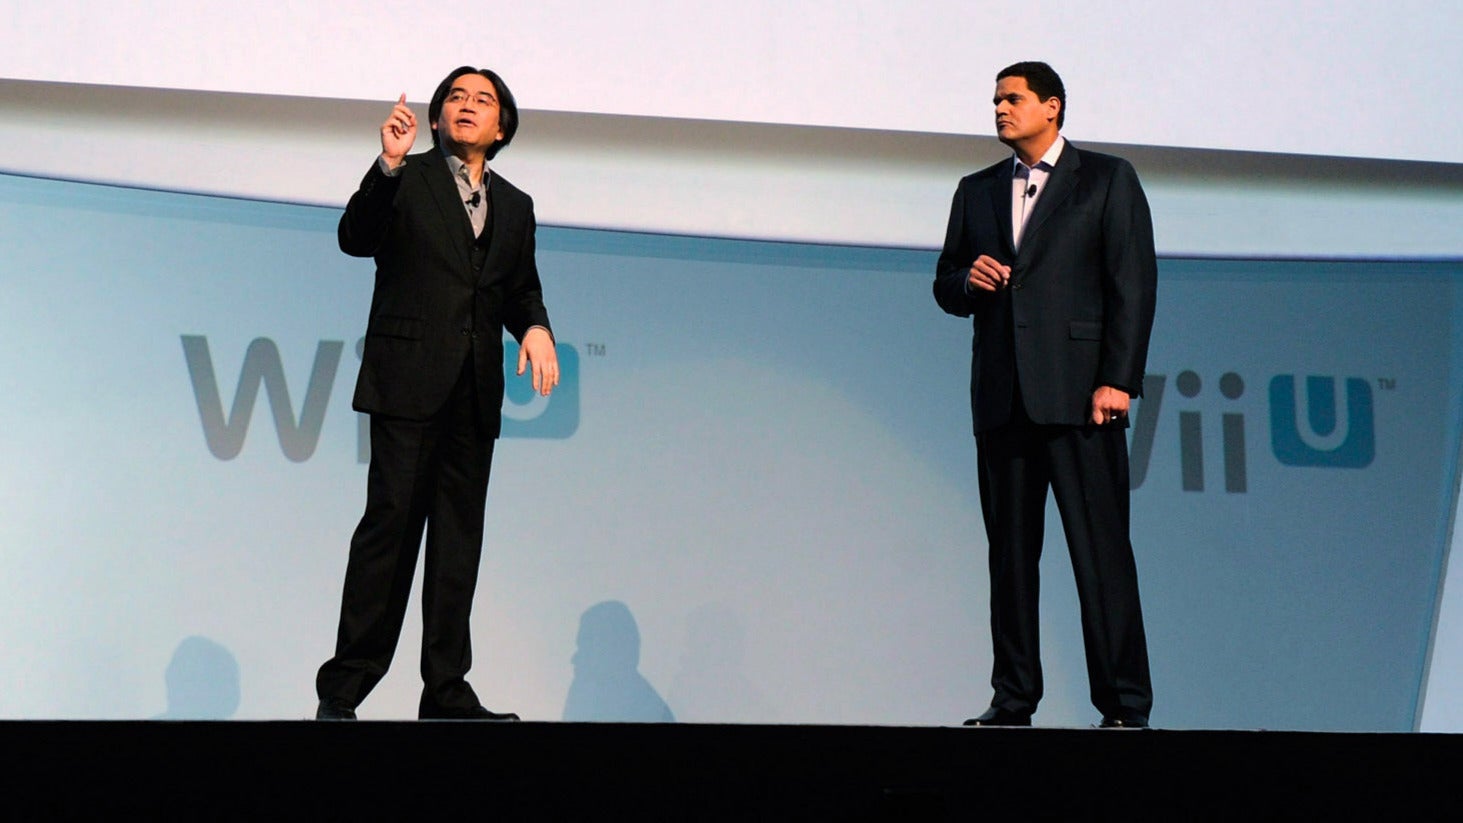 Iwata and Reggie speak on stage at the 2011 E3 gaming expo.  (Photo: Kevork Djansezian, Getty Images)